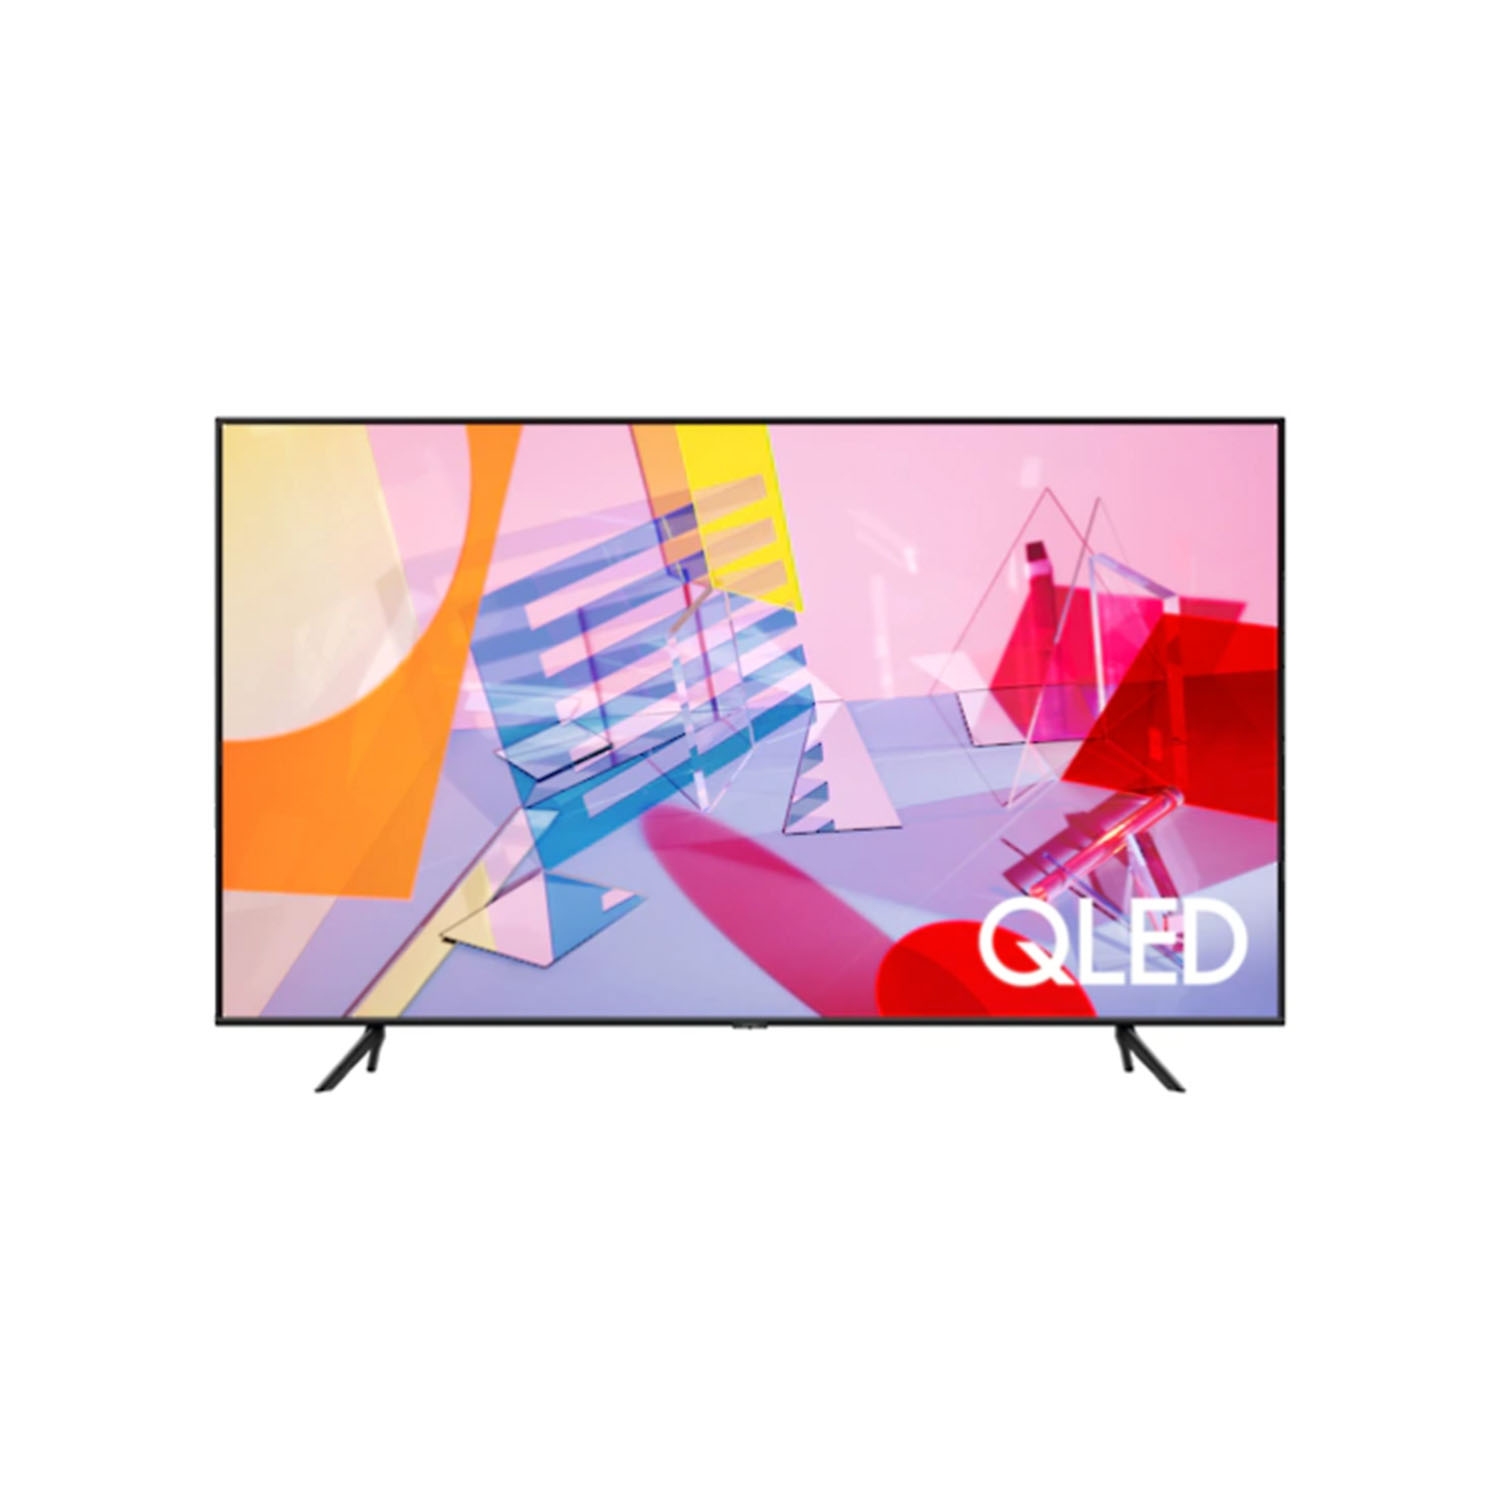 Samsung QE85Q60TAUXXU 85" HDR10 QLED Smart TV with Cinematic Colour &amp; Adaptive Sound - 0